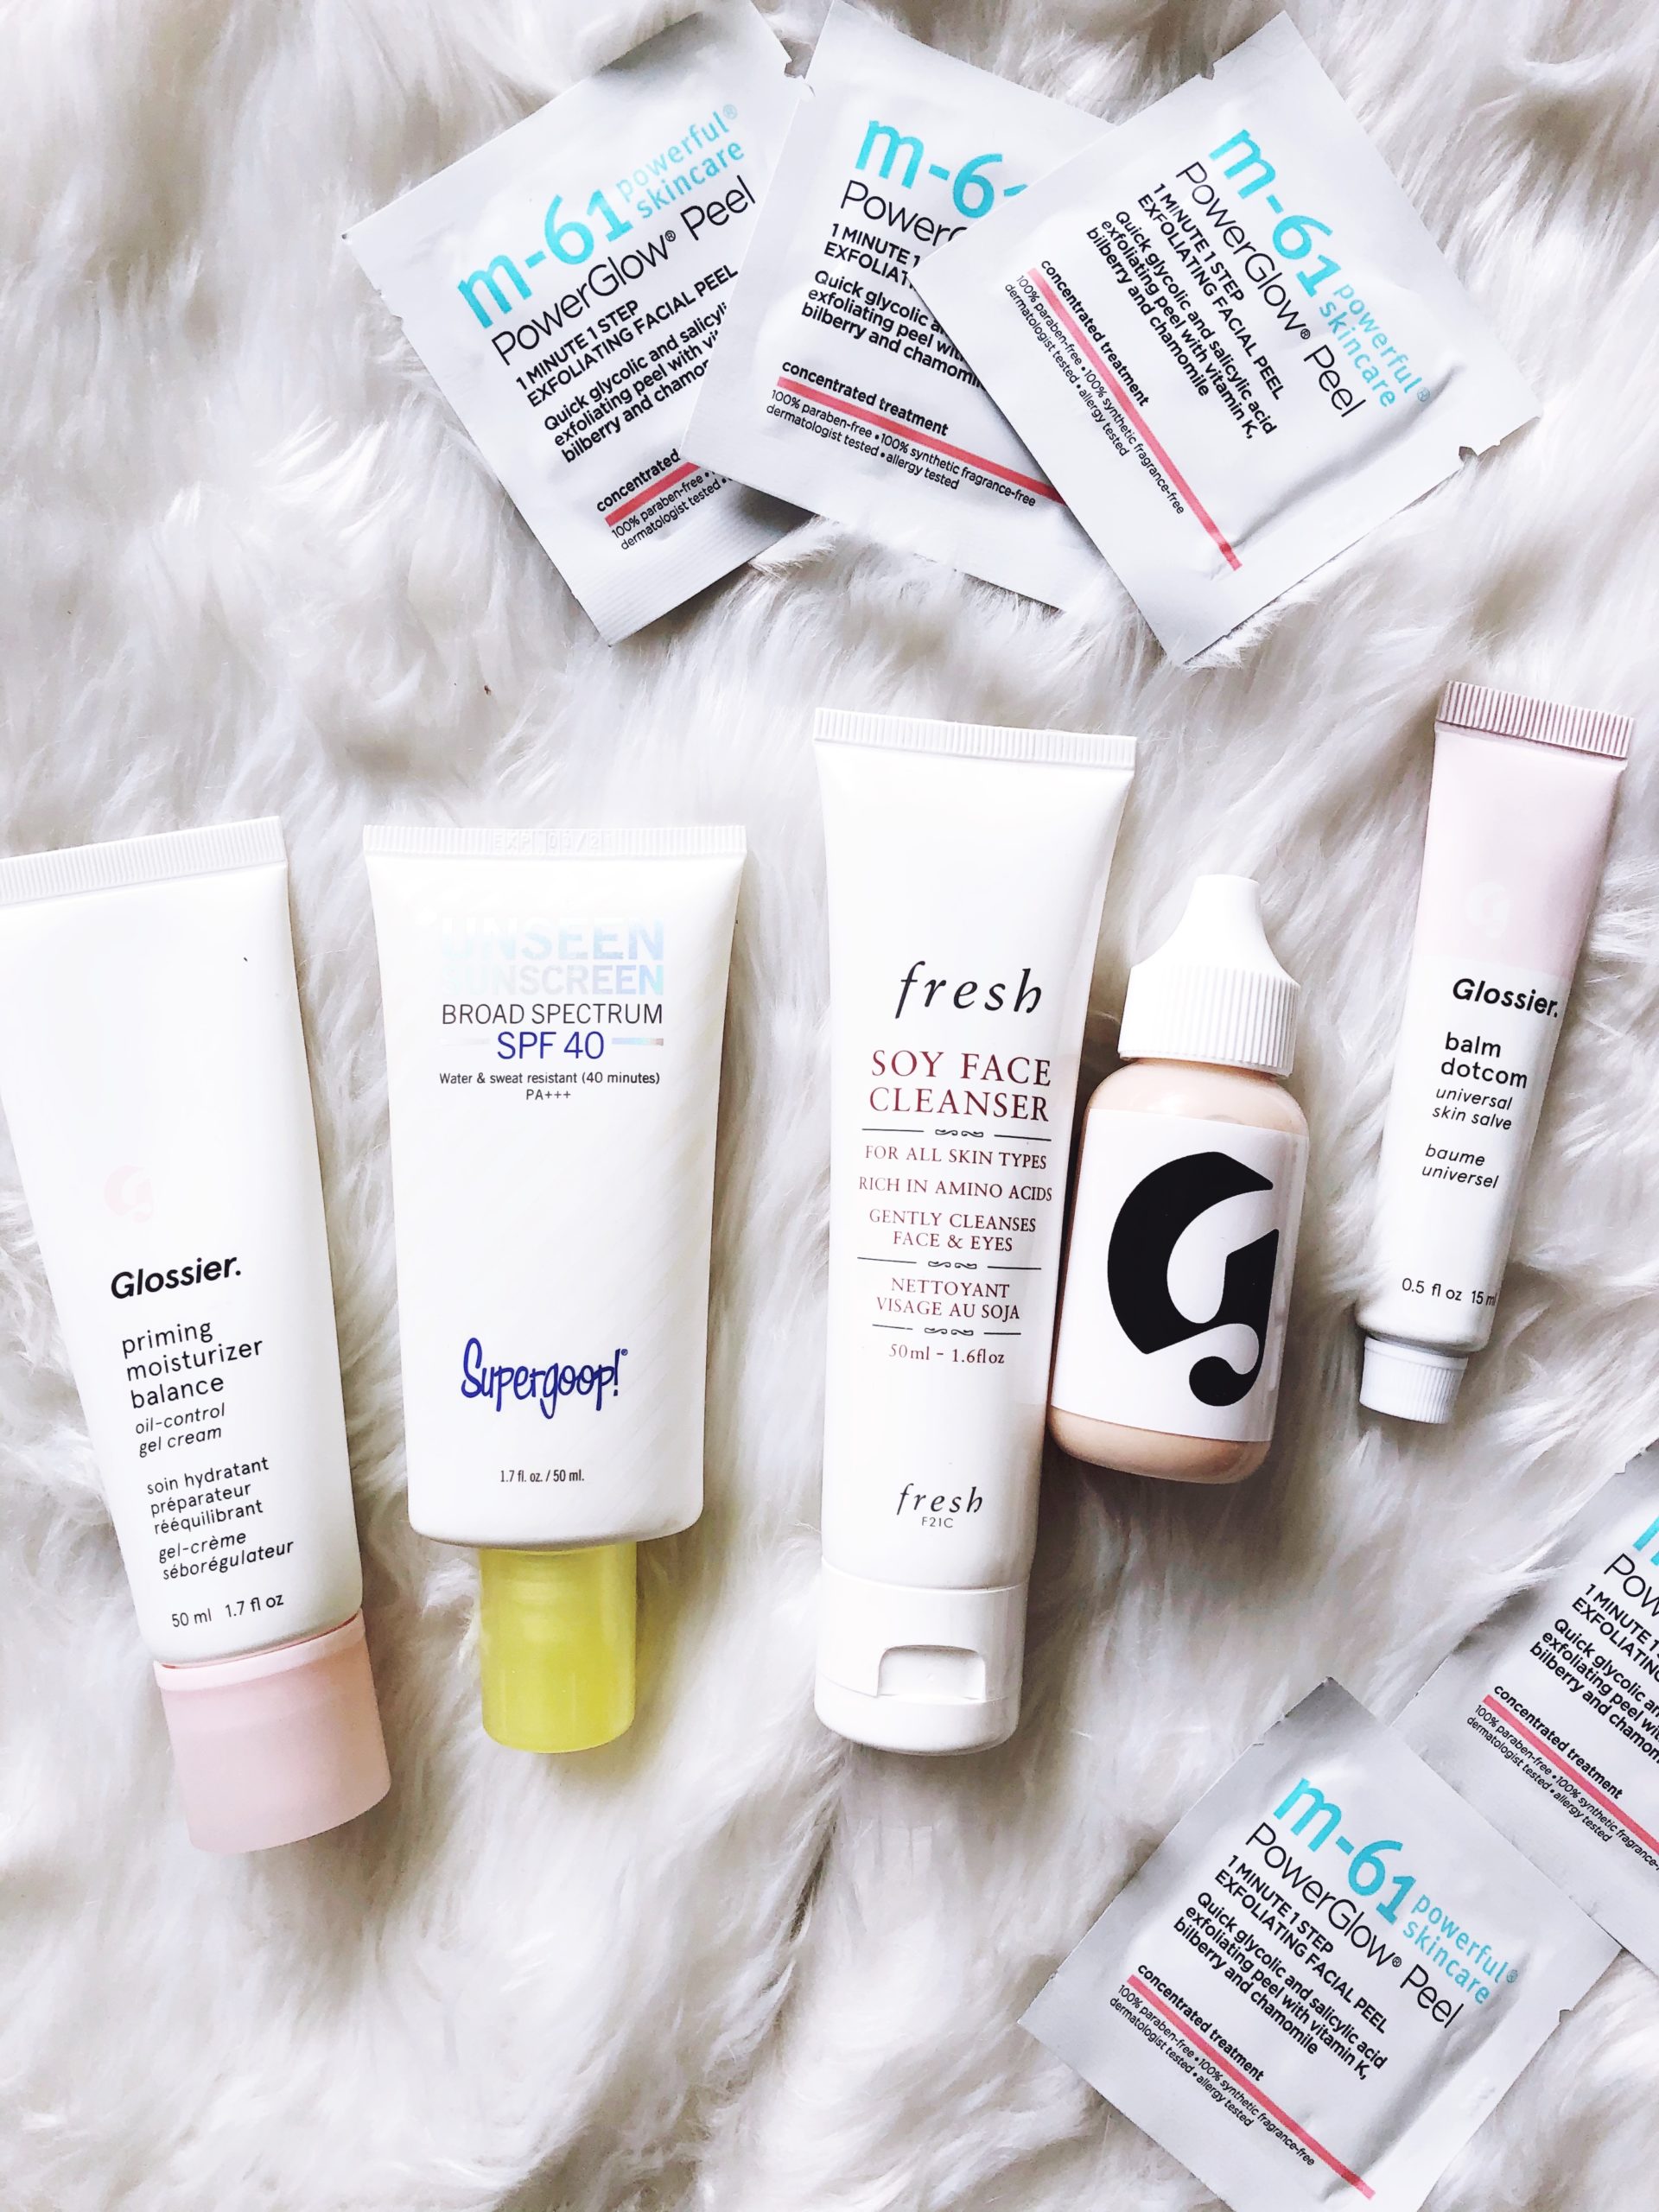 How to Treat Maskne (And Prevent Breakouts) - The Beauty Minimalist